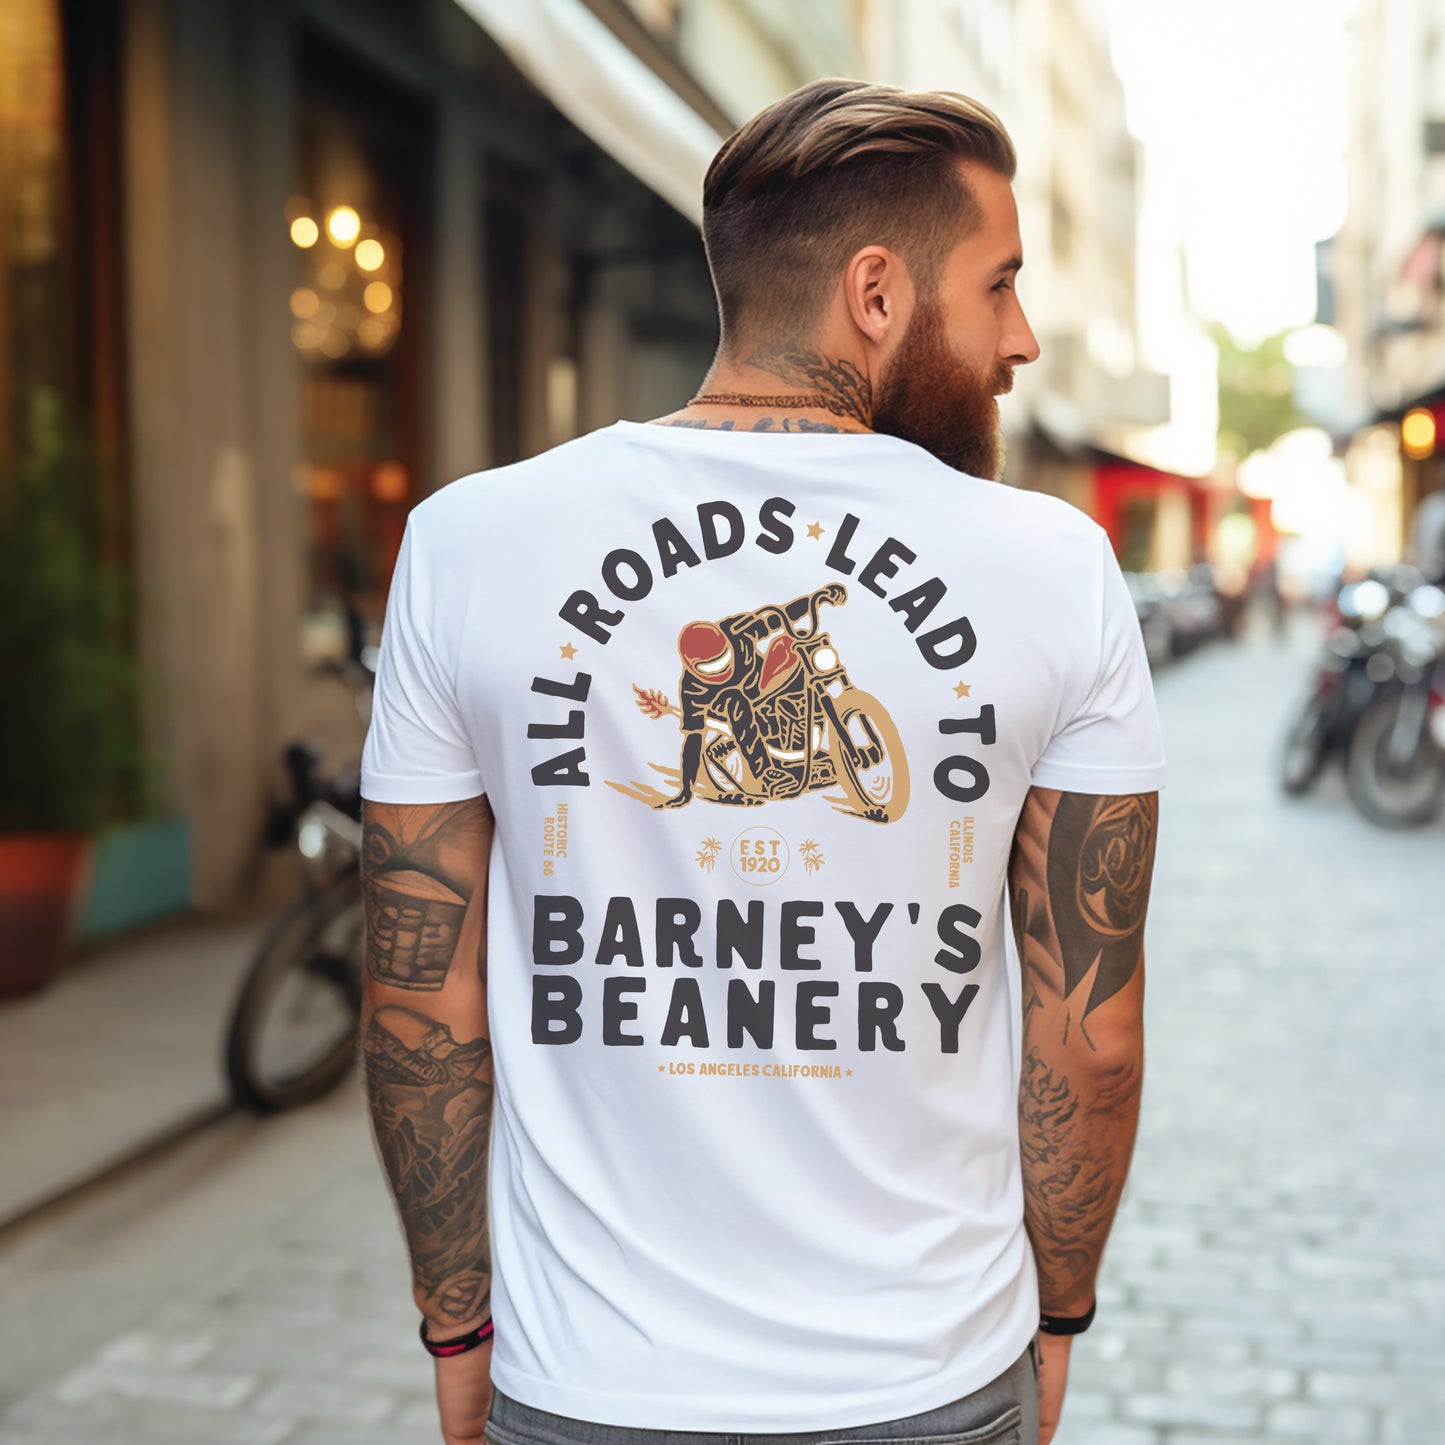 All Roads Lead To | BARNEY'S BEANERY - Men's Graphic Tee | White Bella+Canvas 3001 T-Shirt - Motorcycle Graphic On Back View Of Male Lifestyle Image